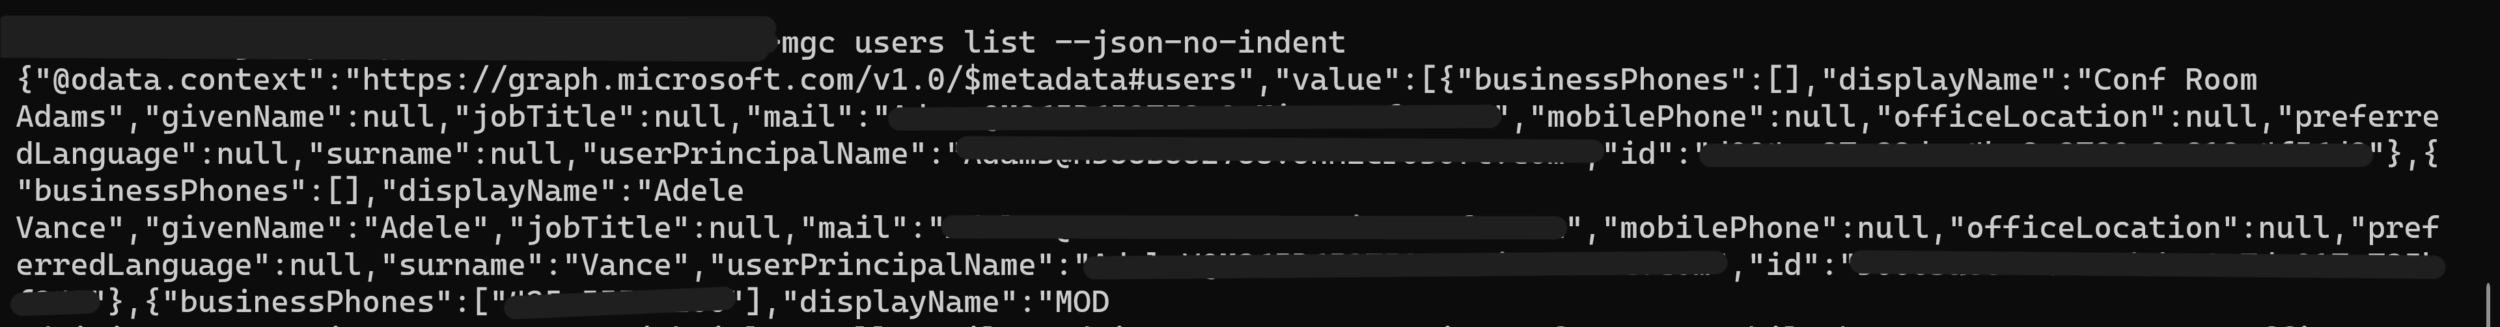 Screenshot with code showinghow one can turn off Indent JSON responses using the --json-no-indent argument for the JSON output formatter.